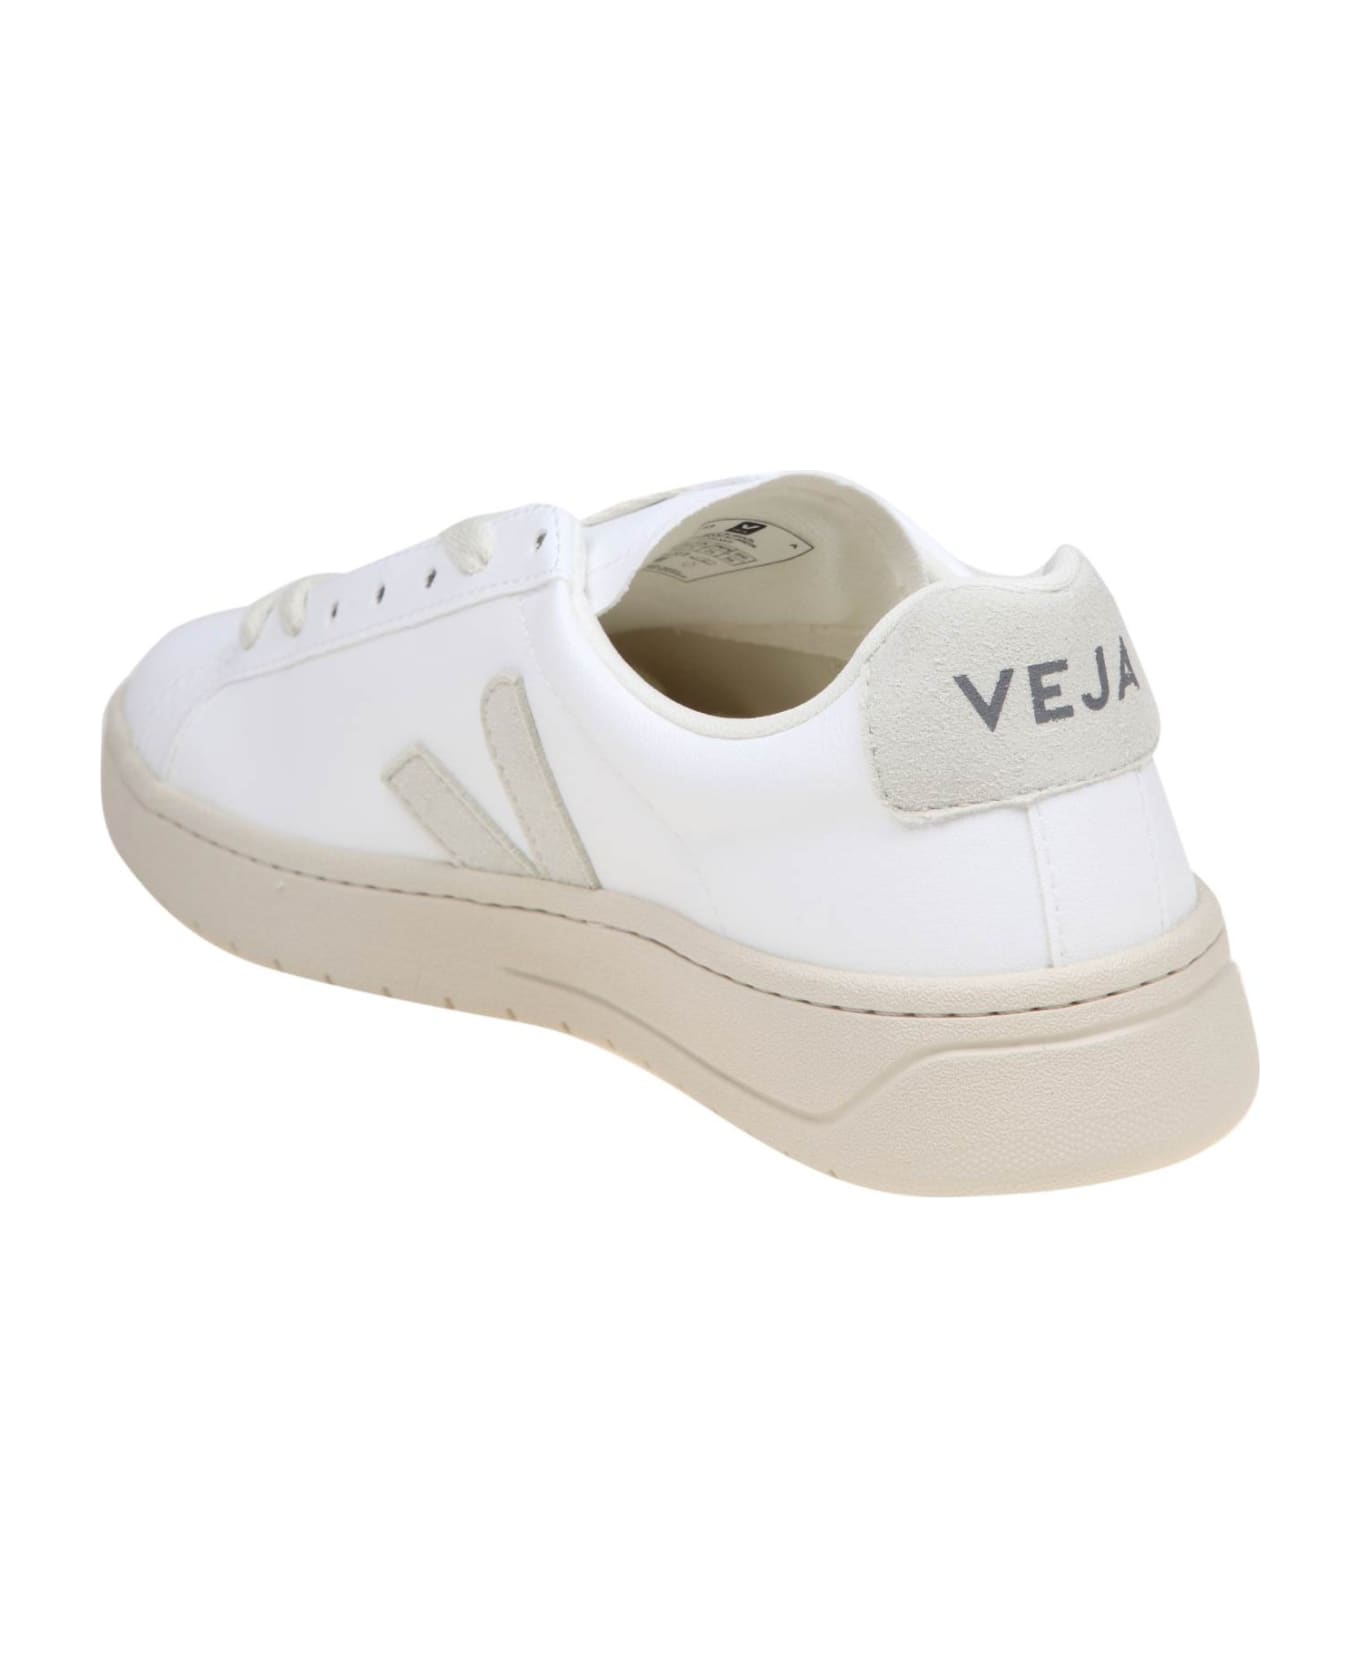 Veja Urca Sneakers In White Coated Cotton